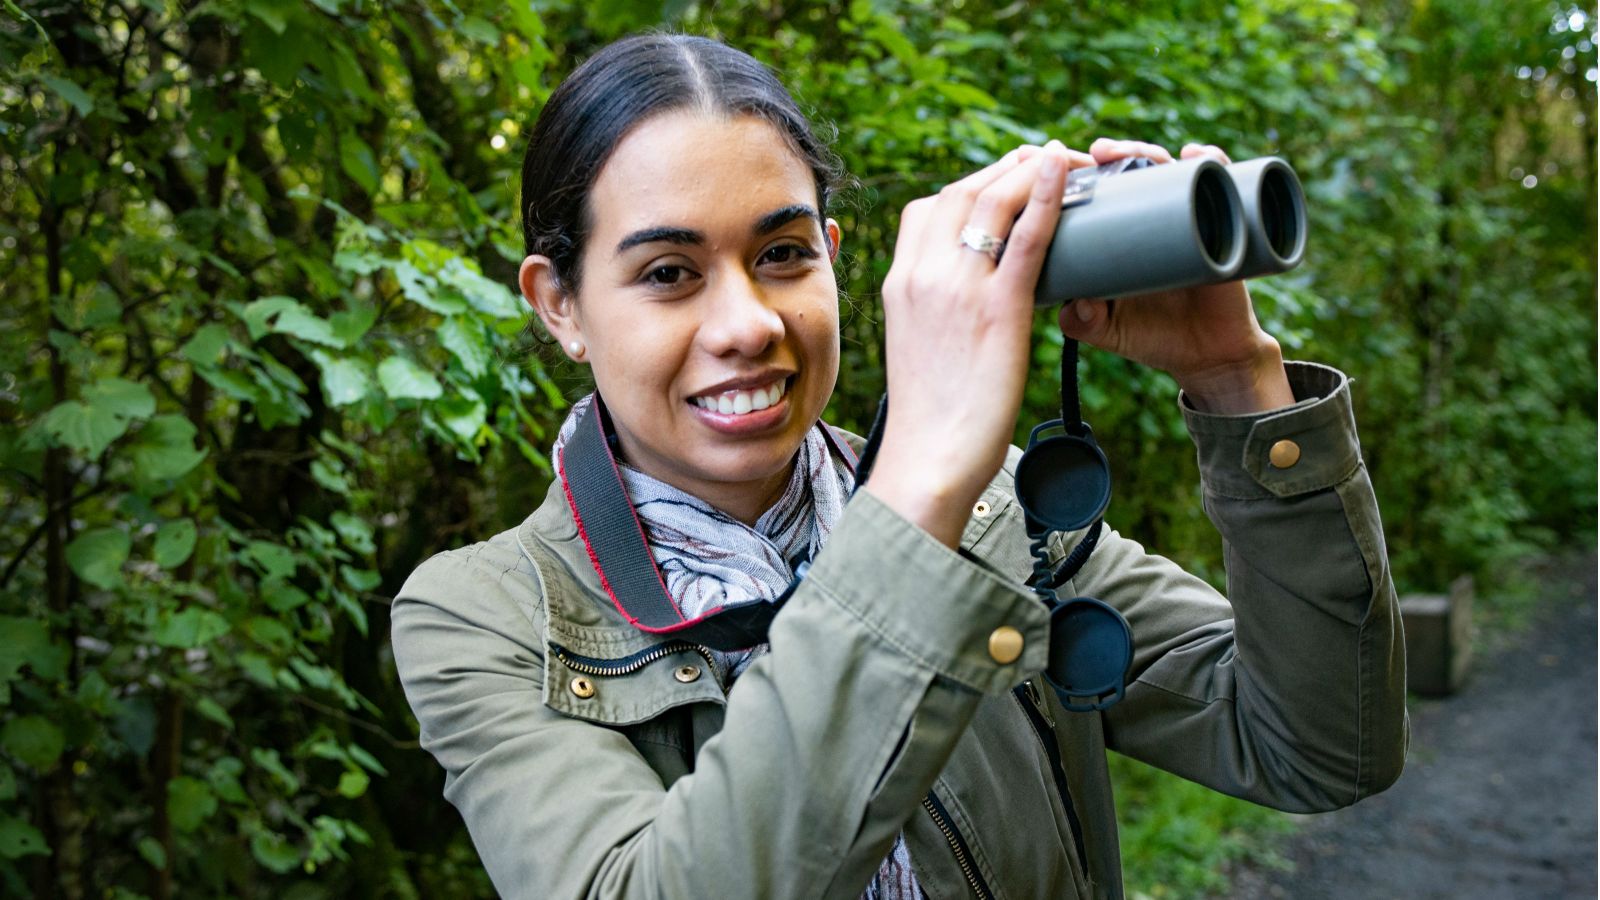 Gliselle Marin holds up binoculars with green trees and bush behind her. 